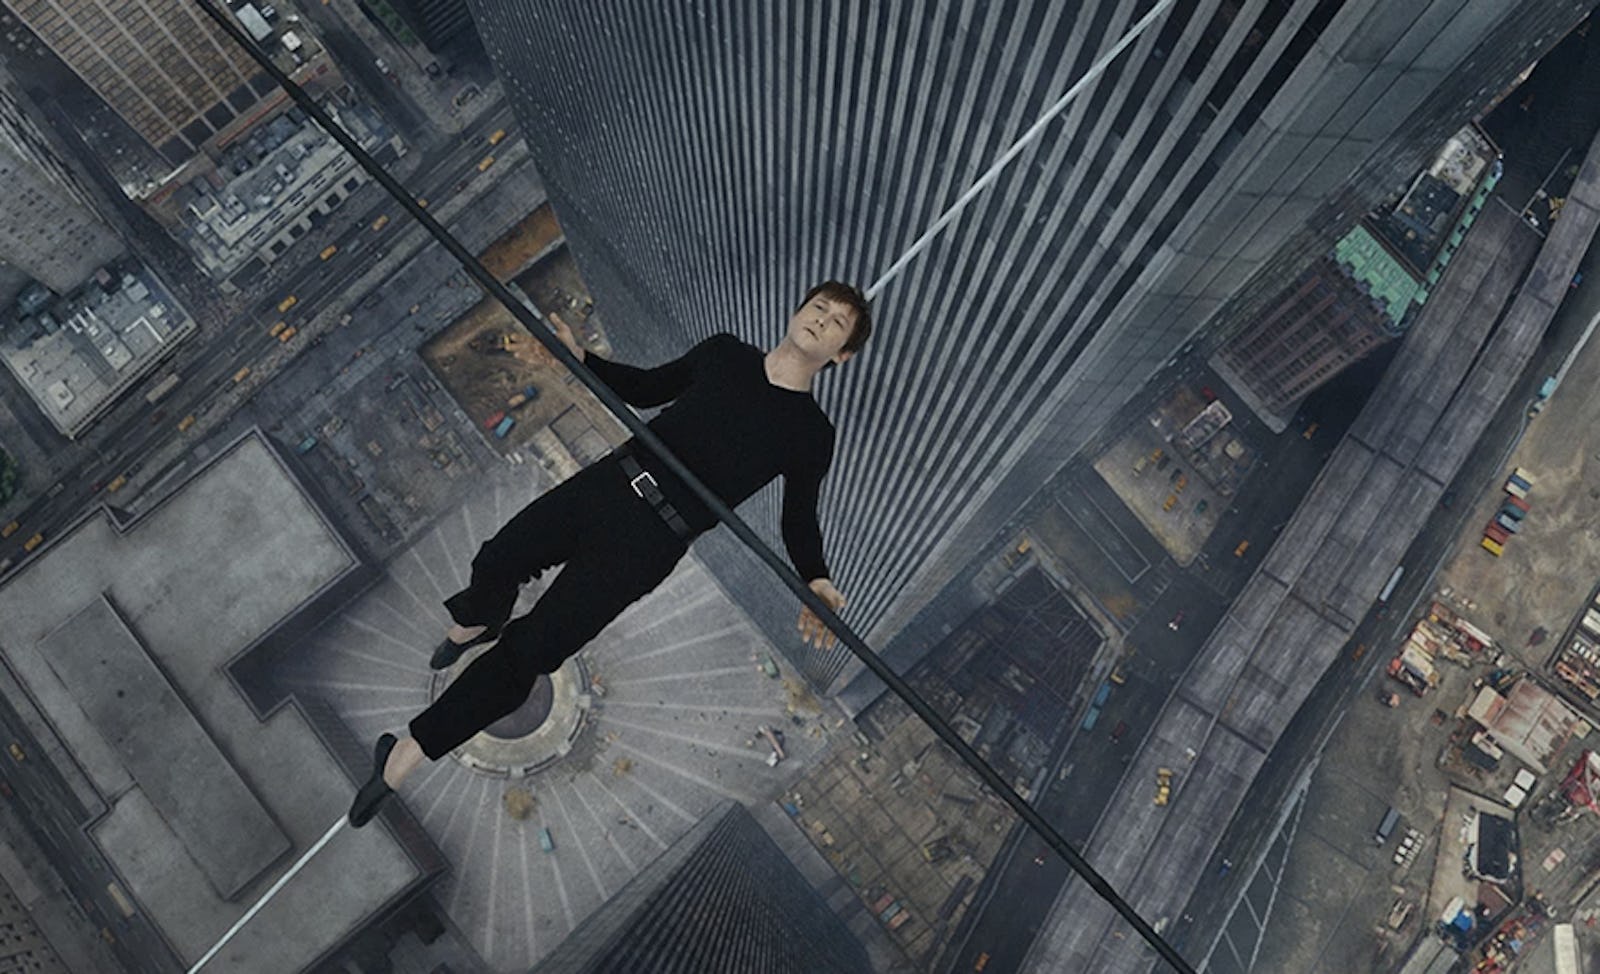 Where Is Philippe Petit Now? The HighWire Artist Has Been On Some Of